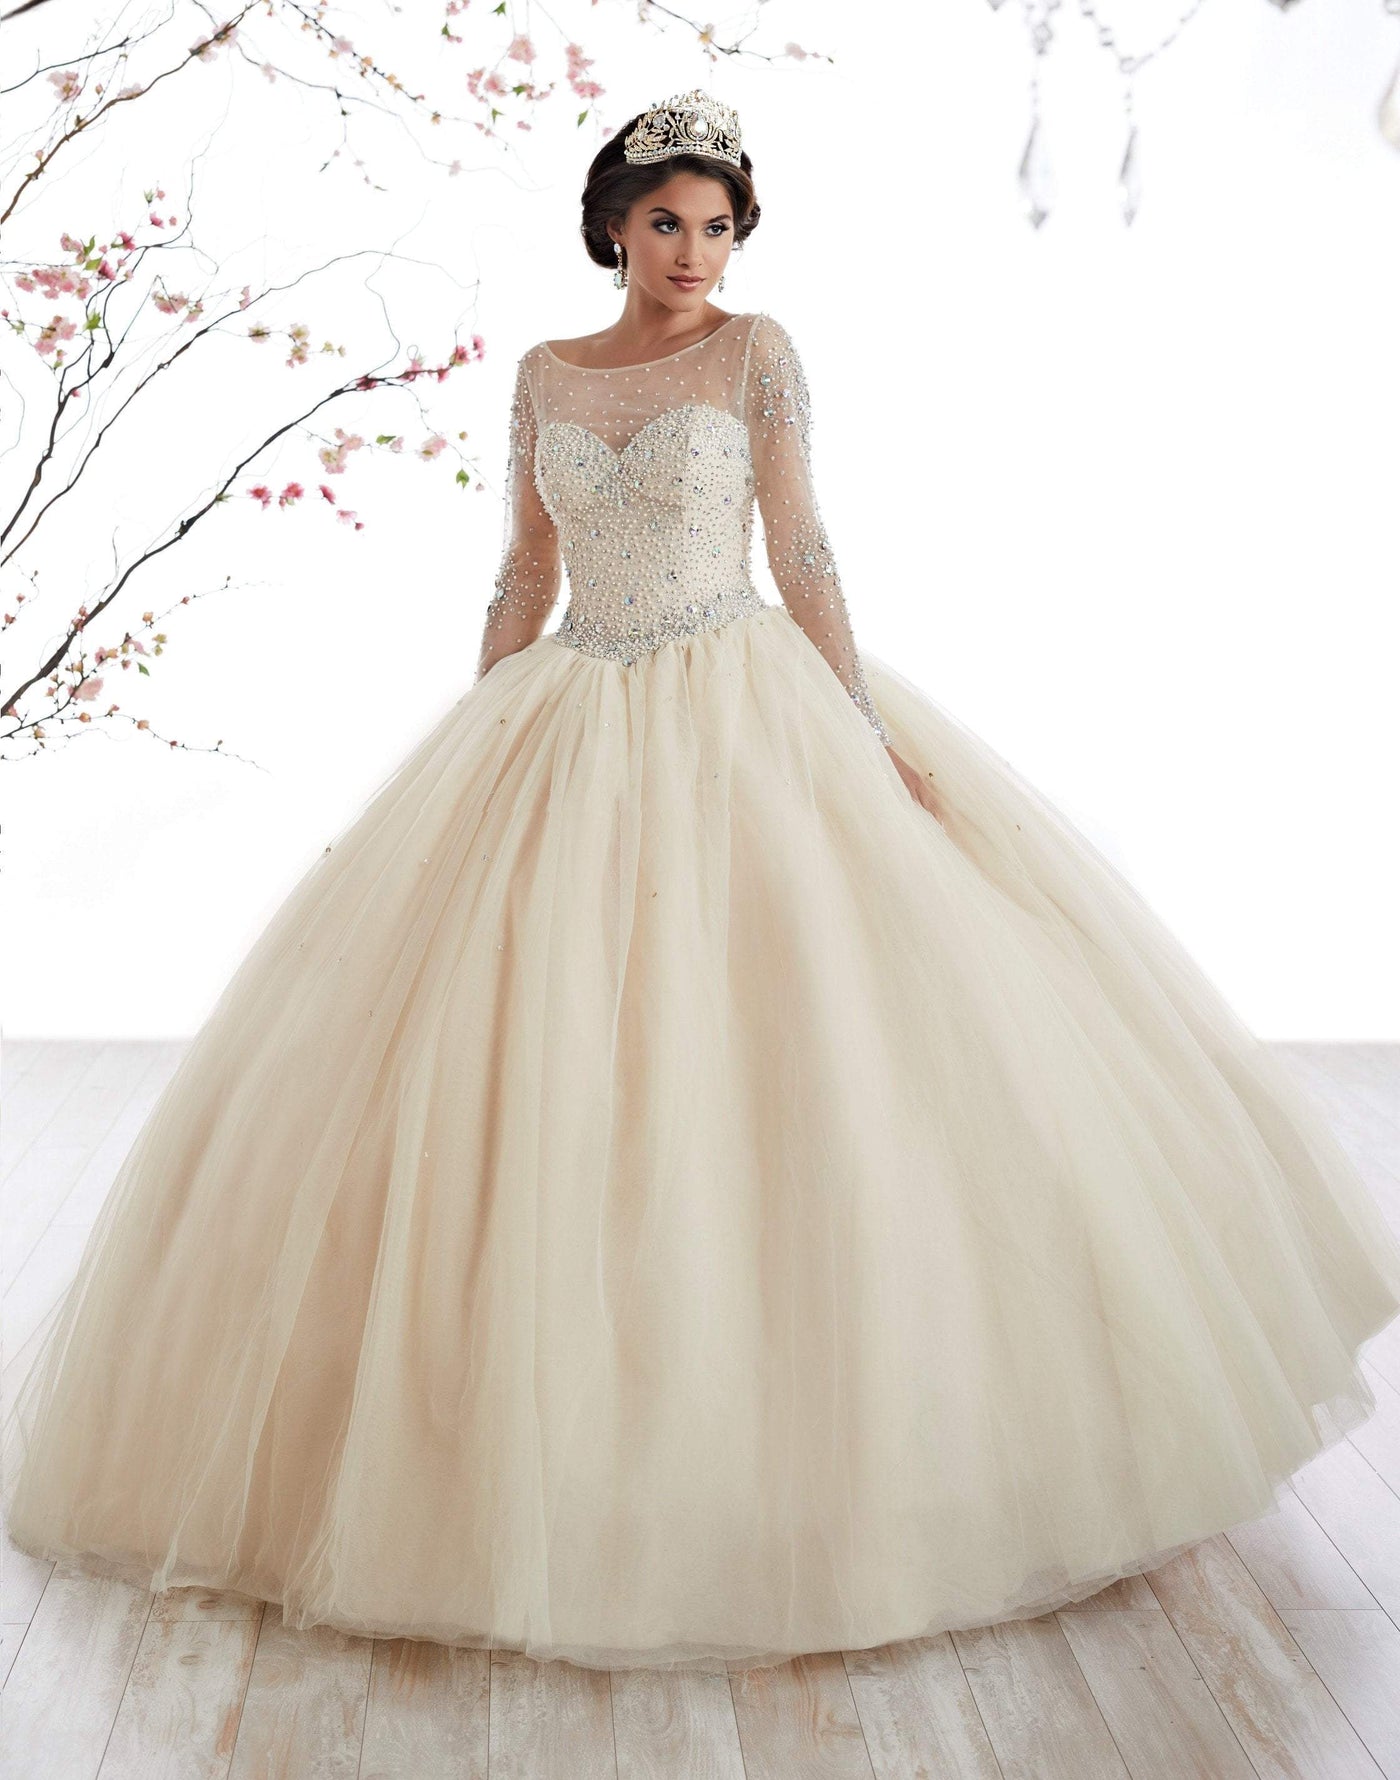 Fiesta Gowns - 56321 Beaded Long Sleeve Illusion Bateau Tulle Ballgown Special Occasion Dress 0 / Champagne